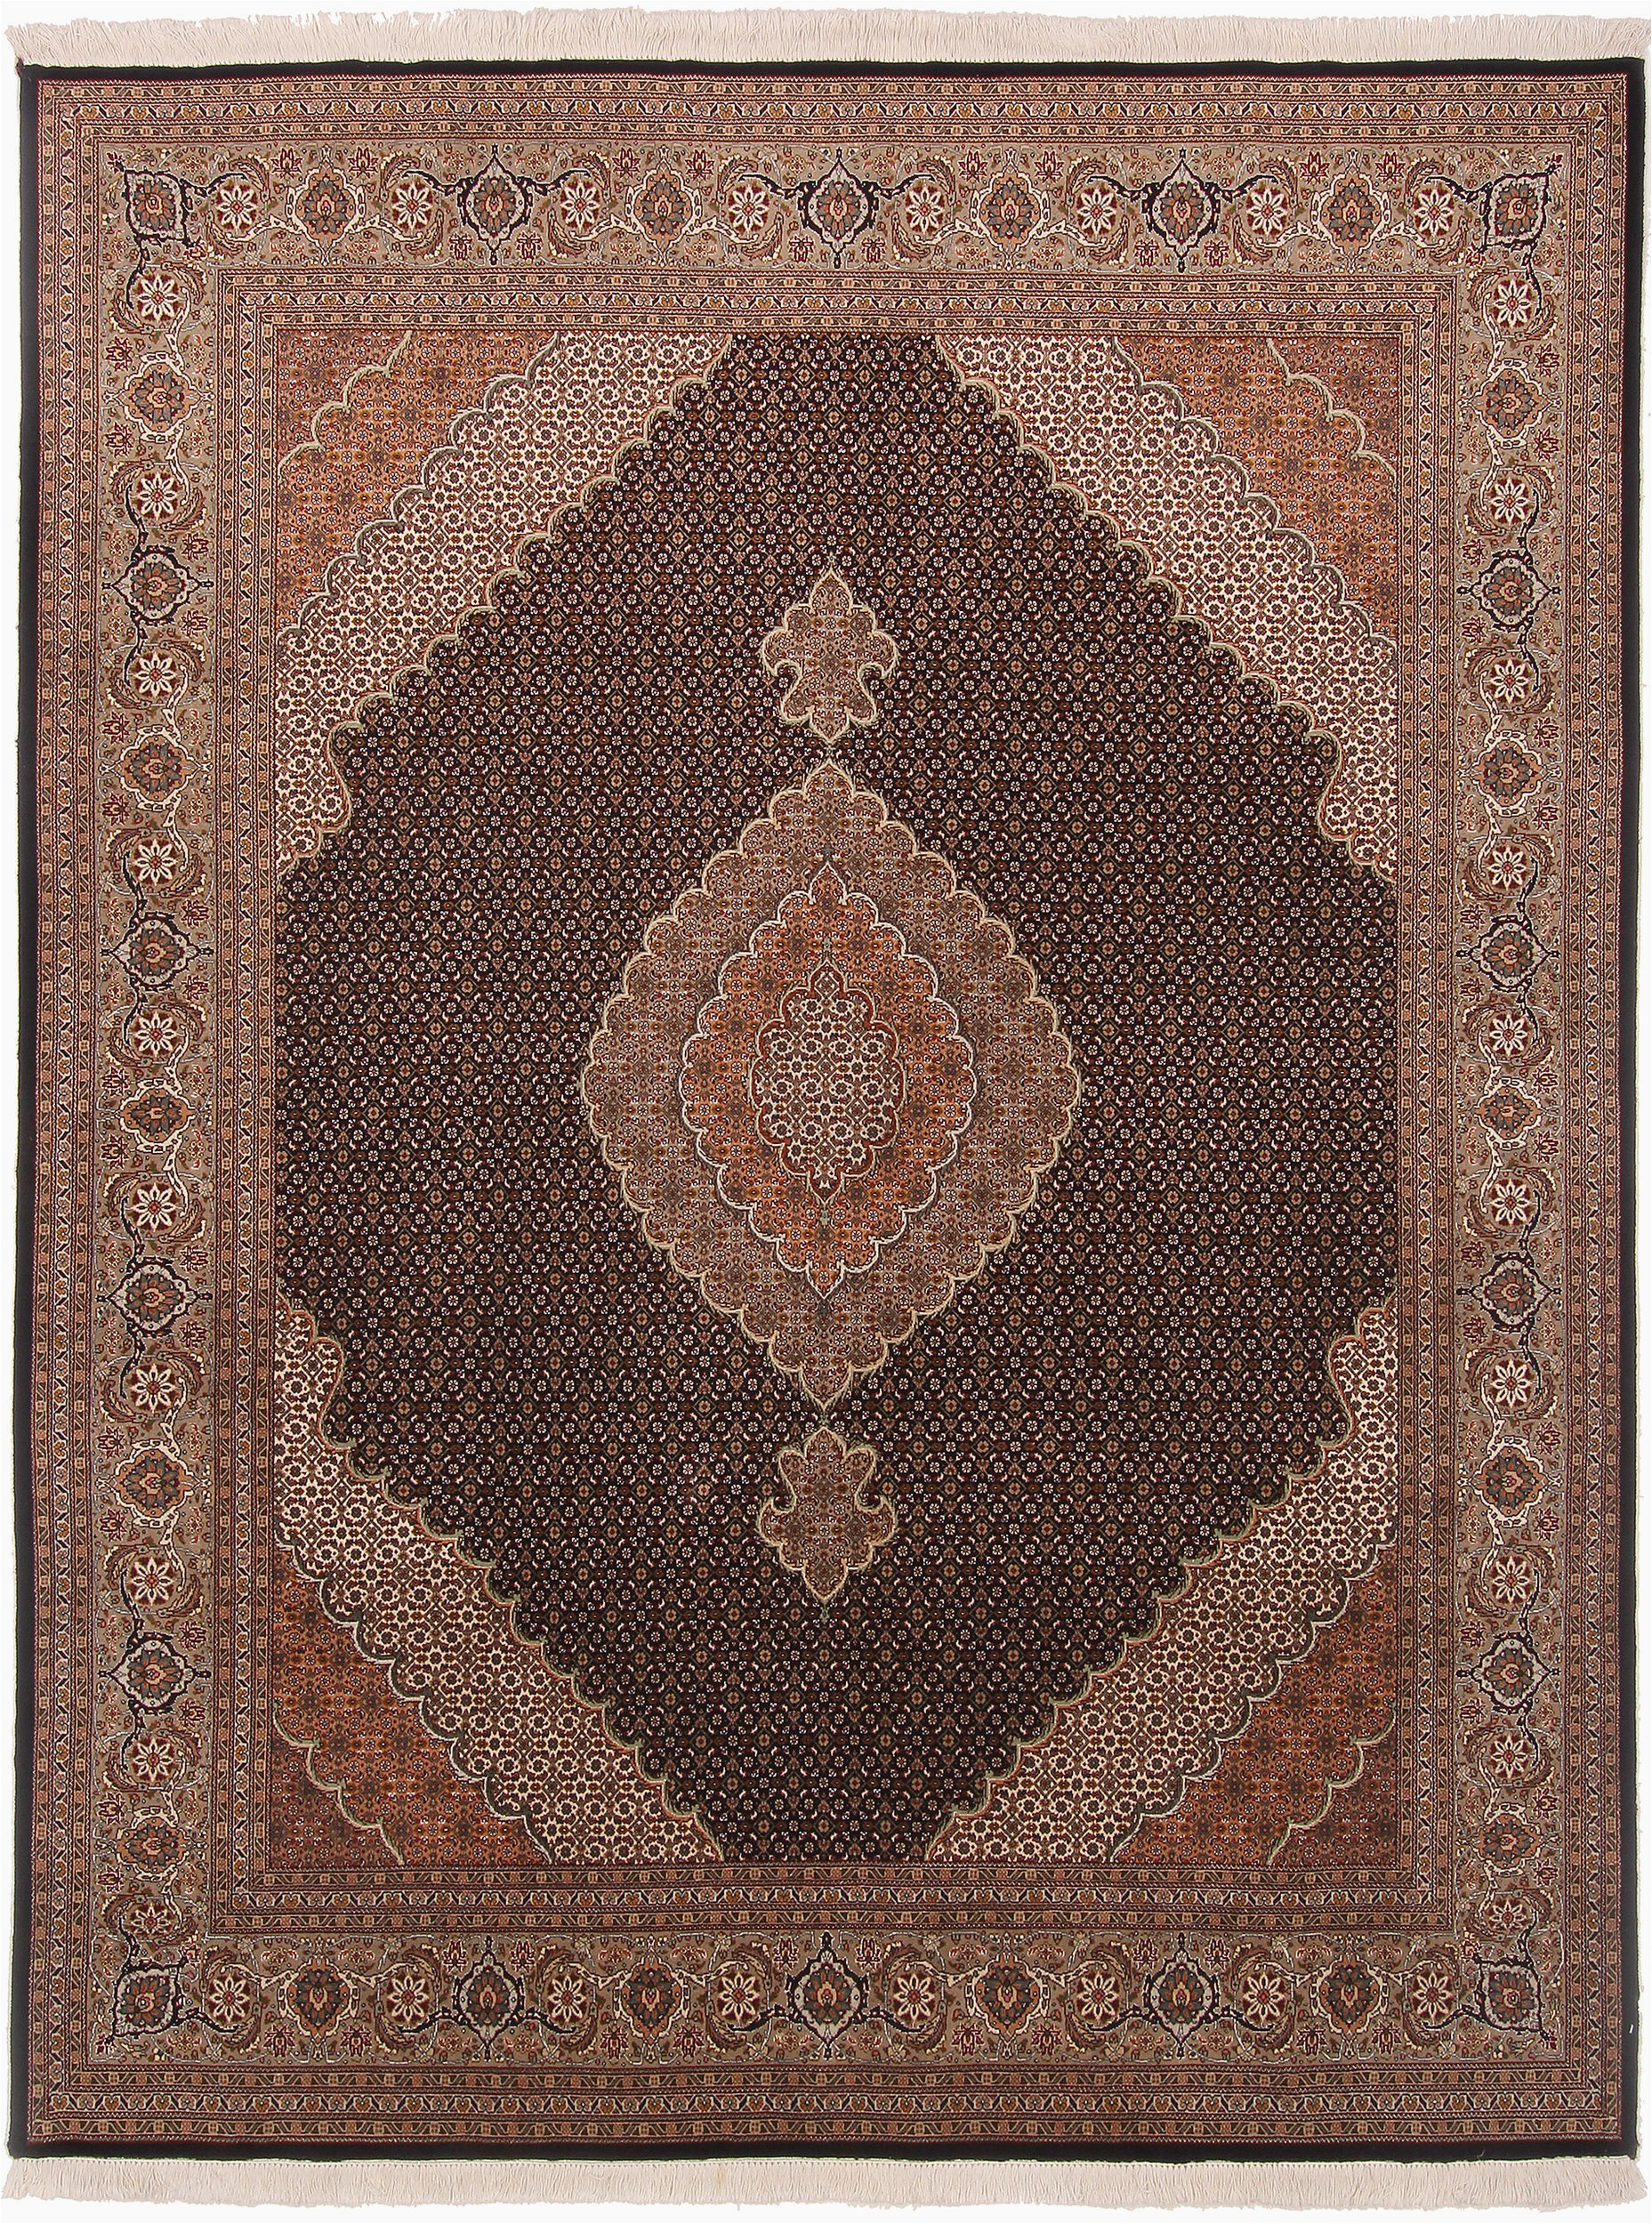 8 Foot Square area Rug Mahi Beige Square Hand Knotted 6 7" X 8 6" area Rug 254